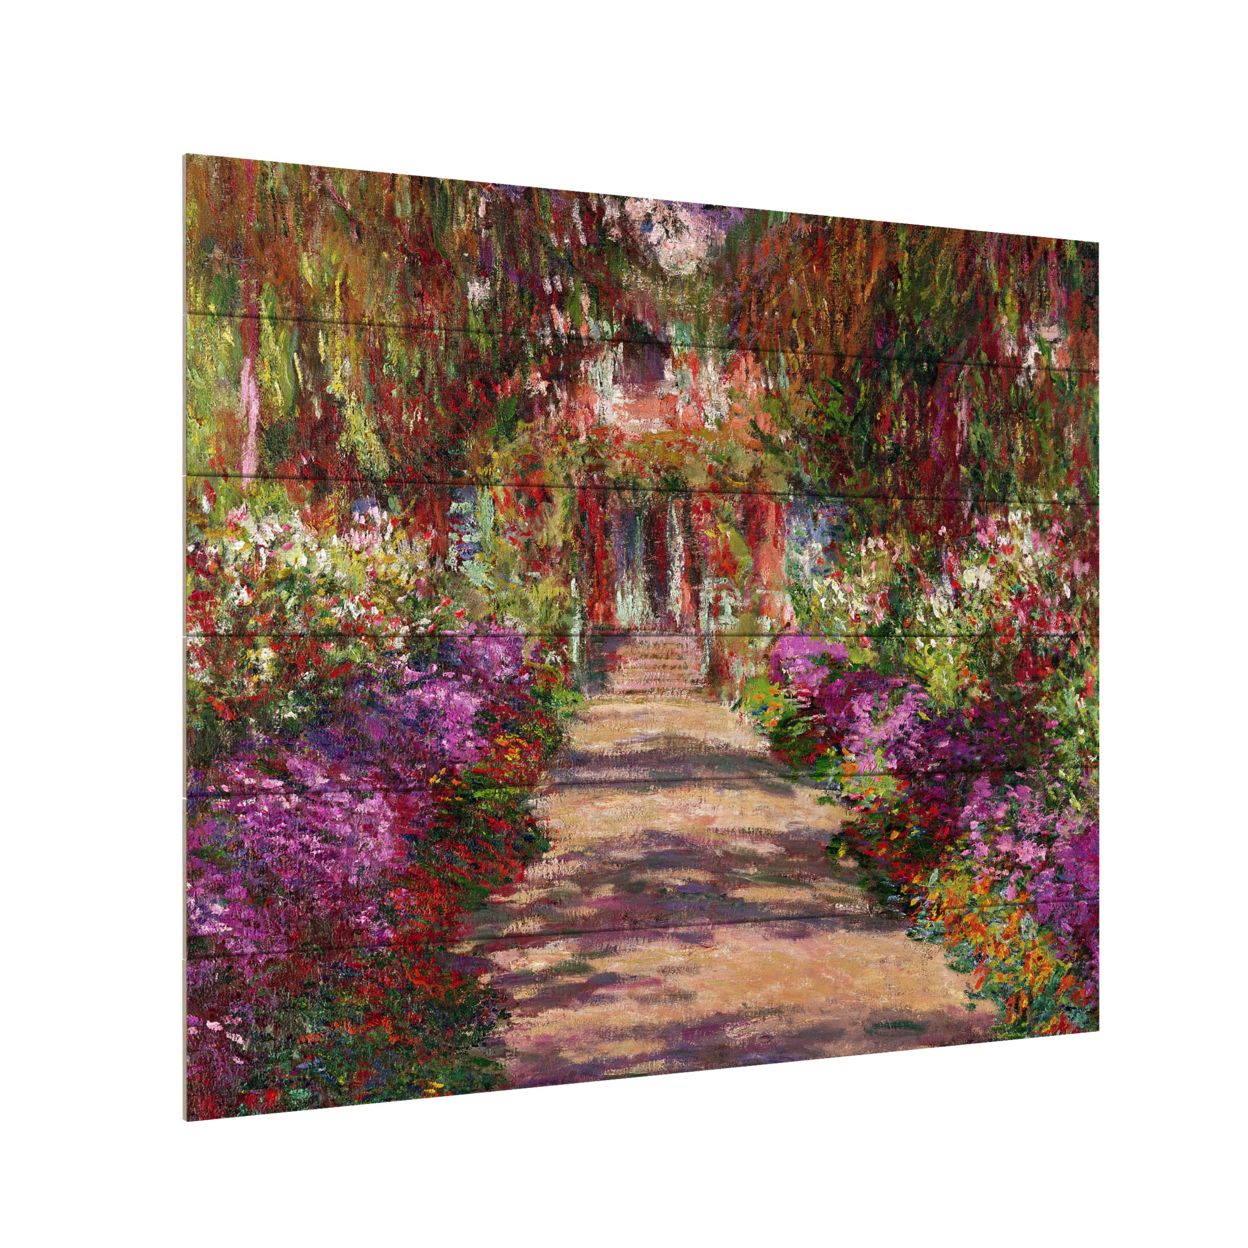 Wooden Slat Art 18 X 22 Inches Titled A Pathway In Monets Garden Ready To Hang Home Decor Picture